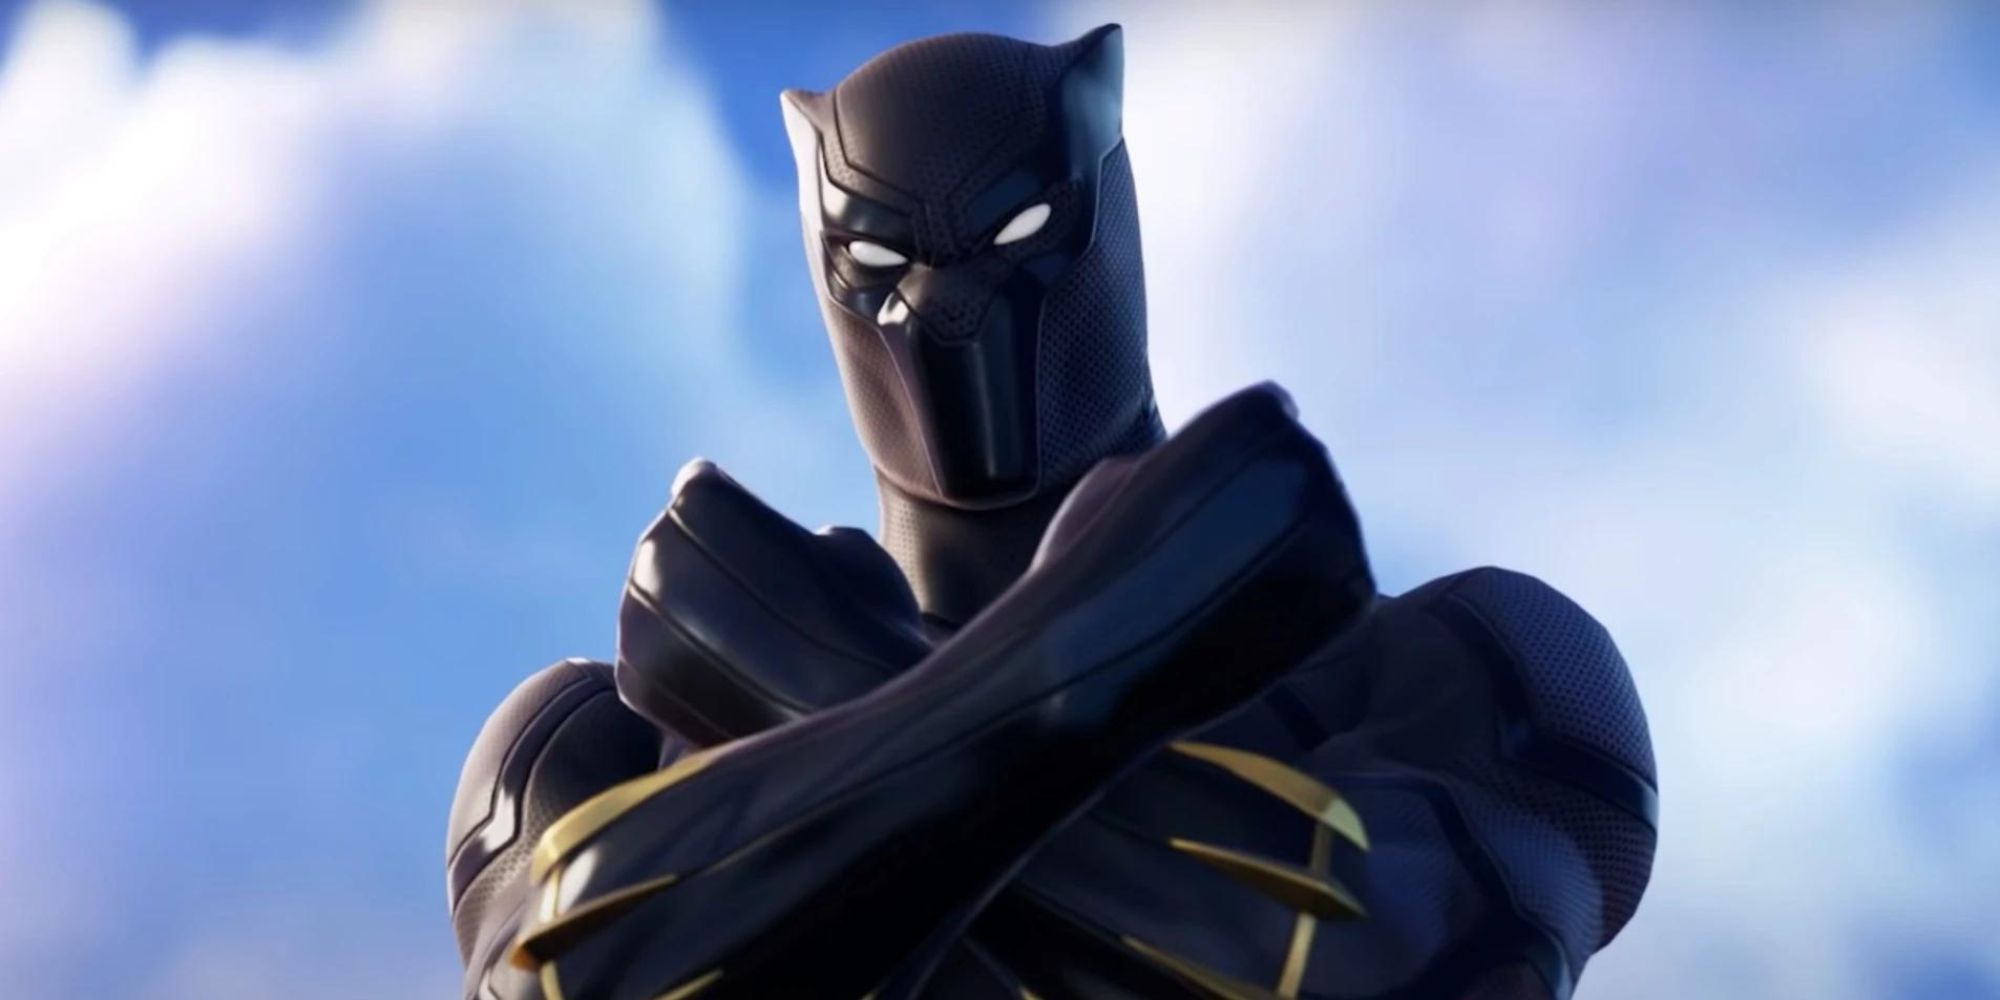 Black Panther crosses his arms in front of a blue sky